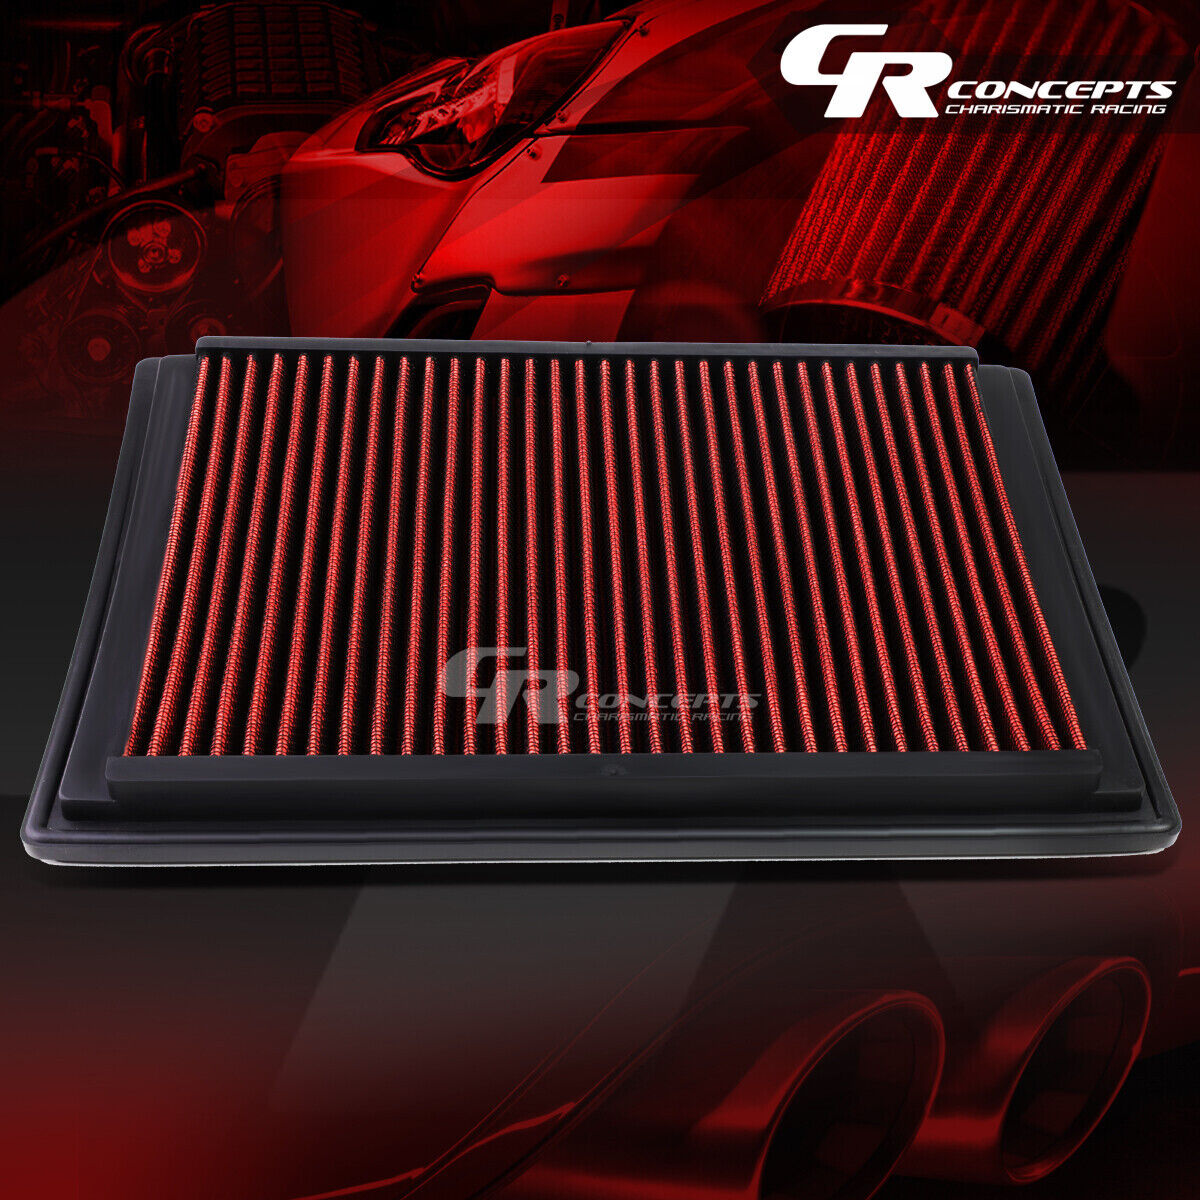 RED WASHABLE HIGH FLOW AIR FILTER FOR 05-08 F-150-F-350 LINCOLN MARK LT 5.4L